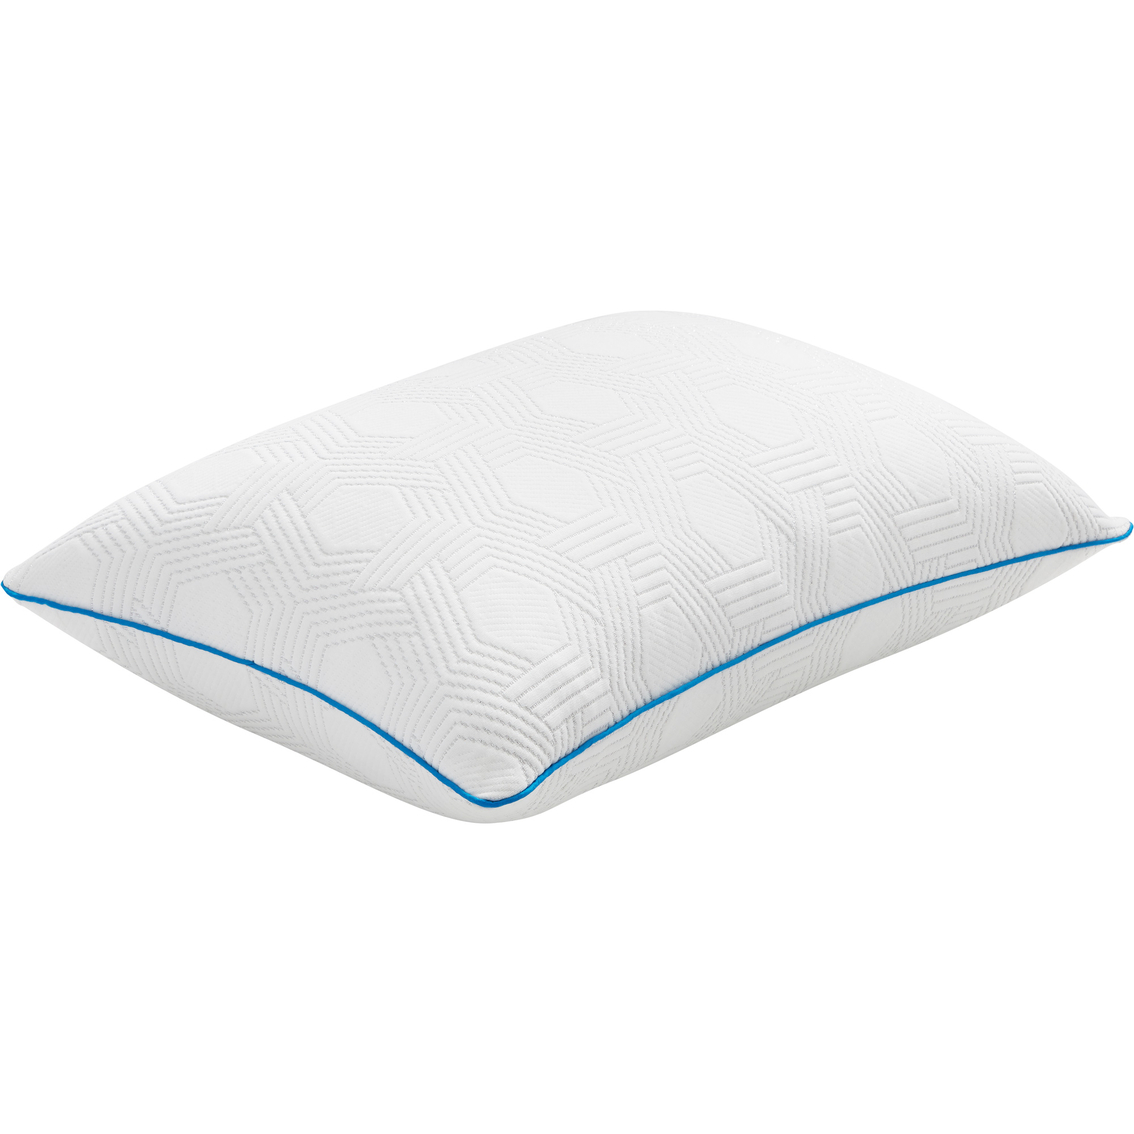 Dr. Oz Stay the Night EngineeredDown Premium Fill Pillow - Image 3 of 10